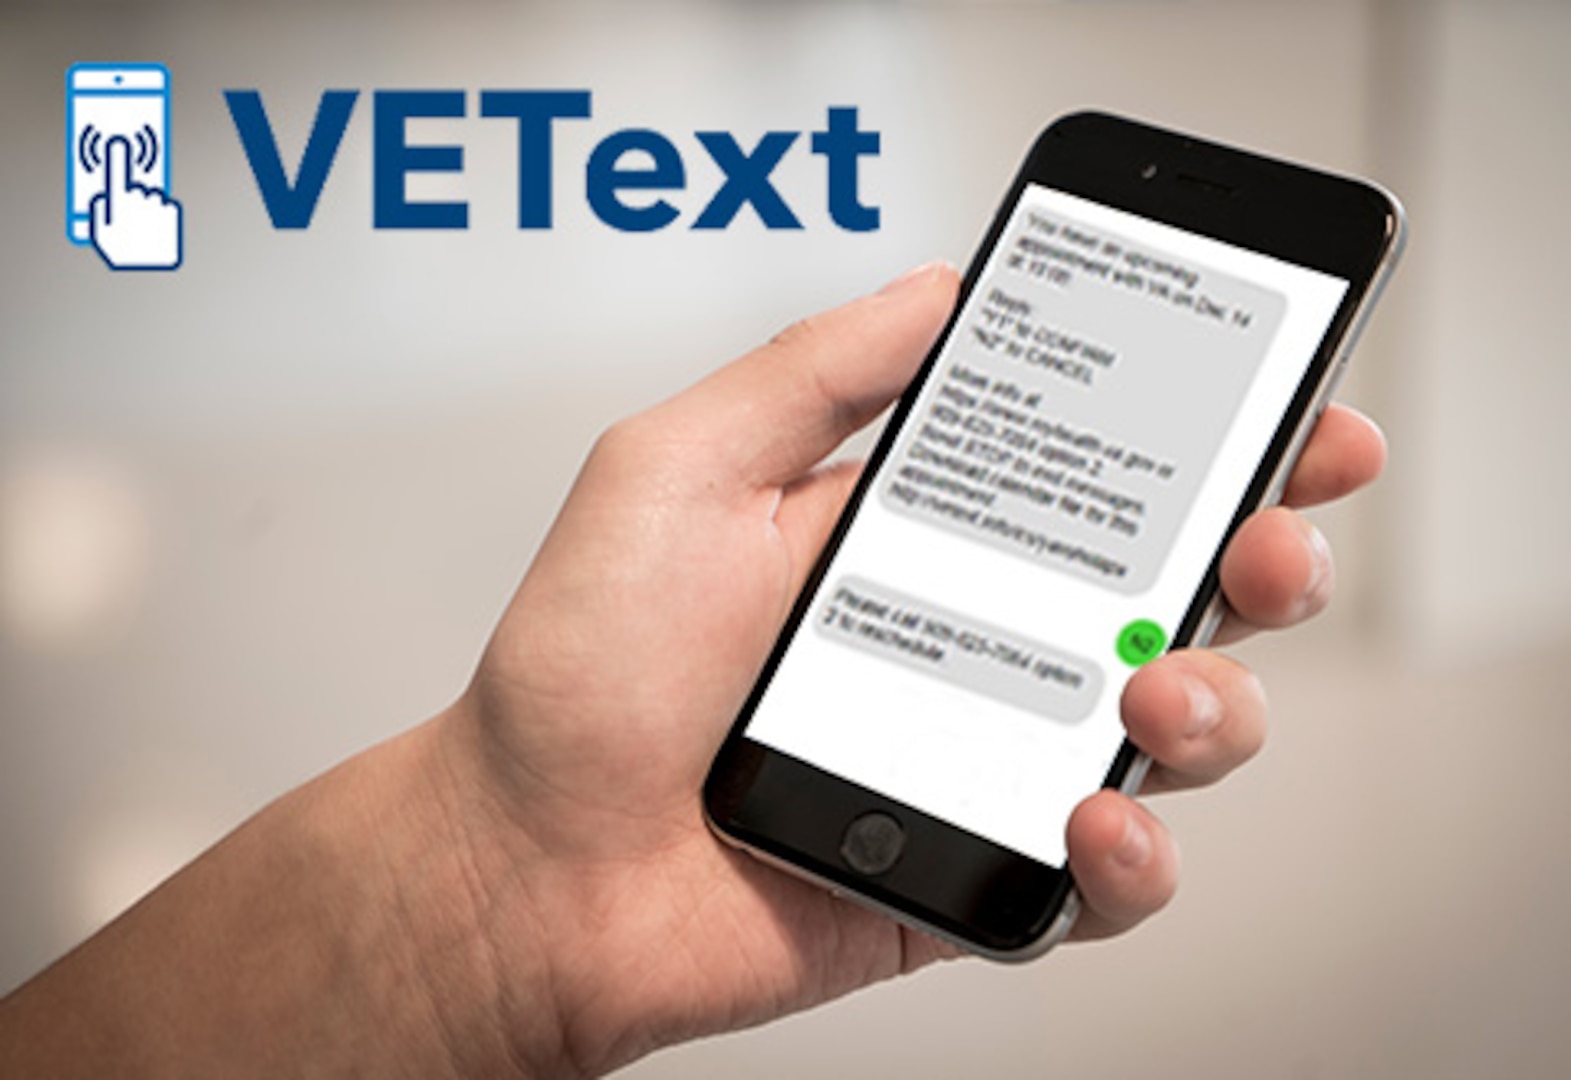 The U.S. Department of Veterans Affairs (VA) recently launched VEText, a text messaging appointment-reminder system, which to date has helped VA reduce no-show medical visits by more than 100,000.